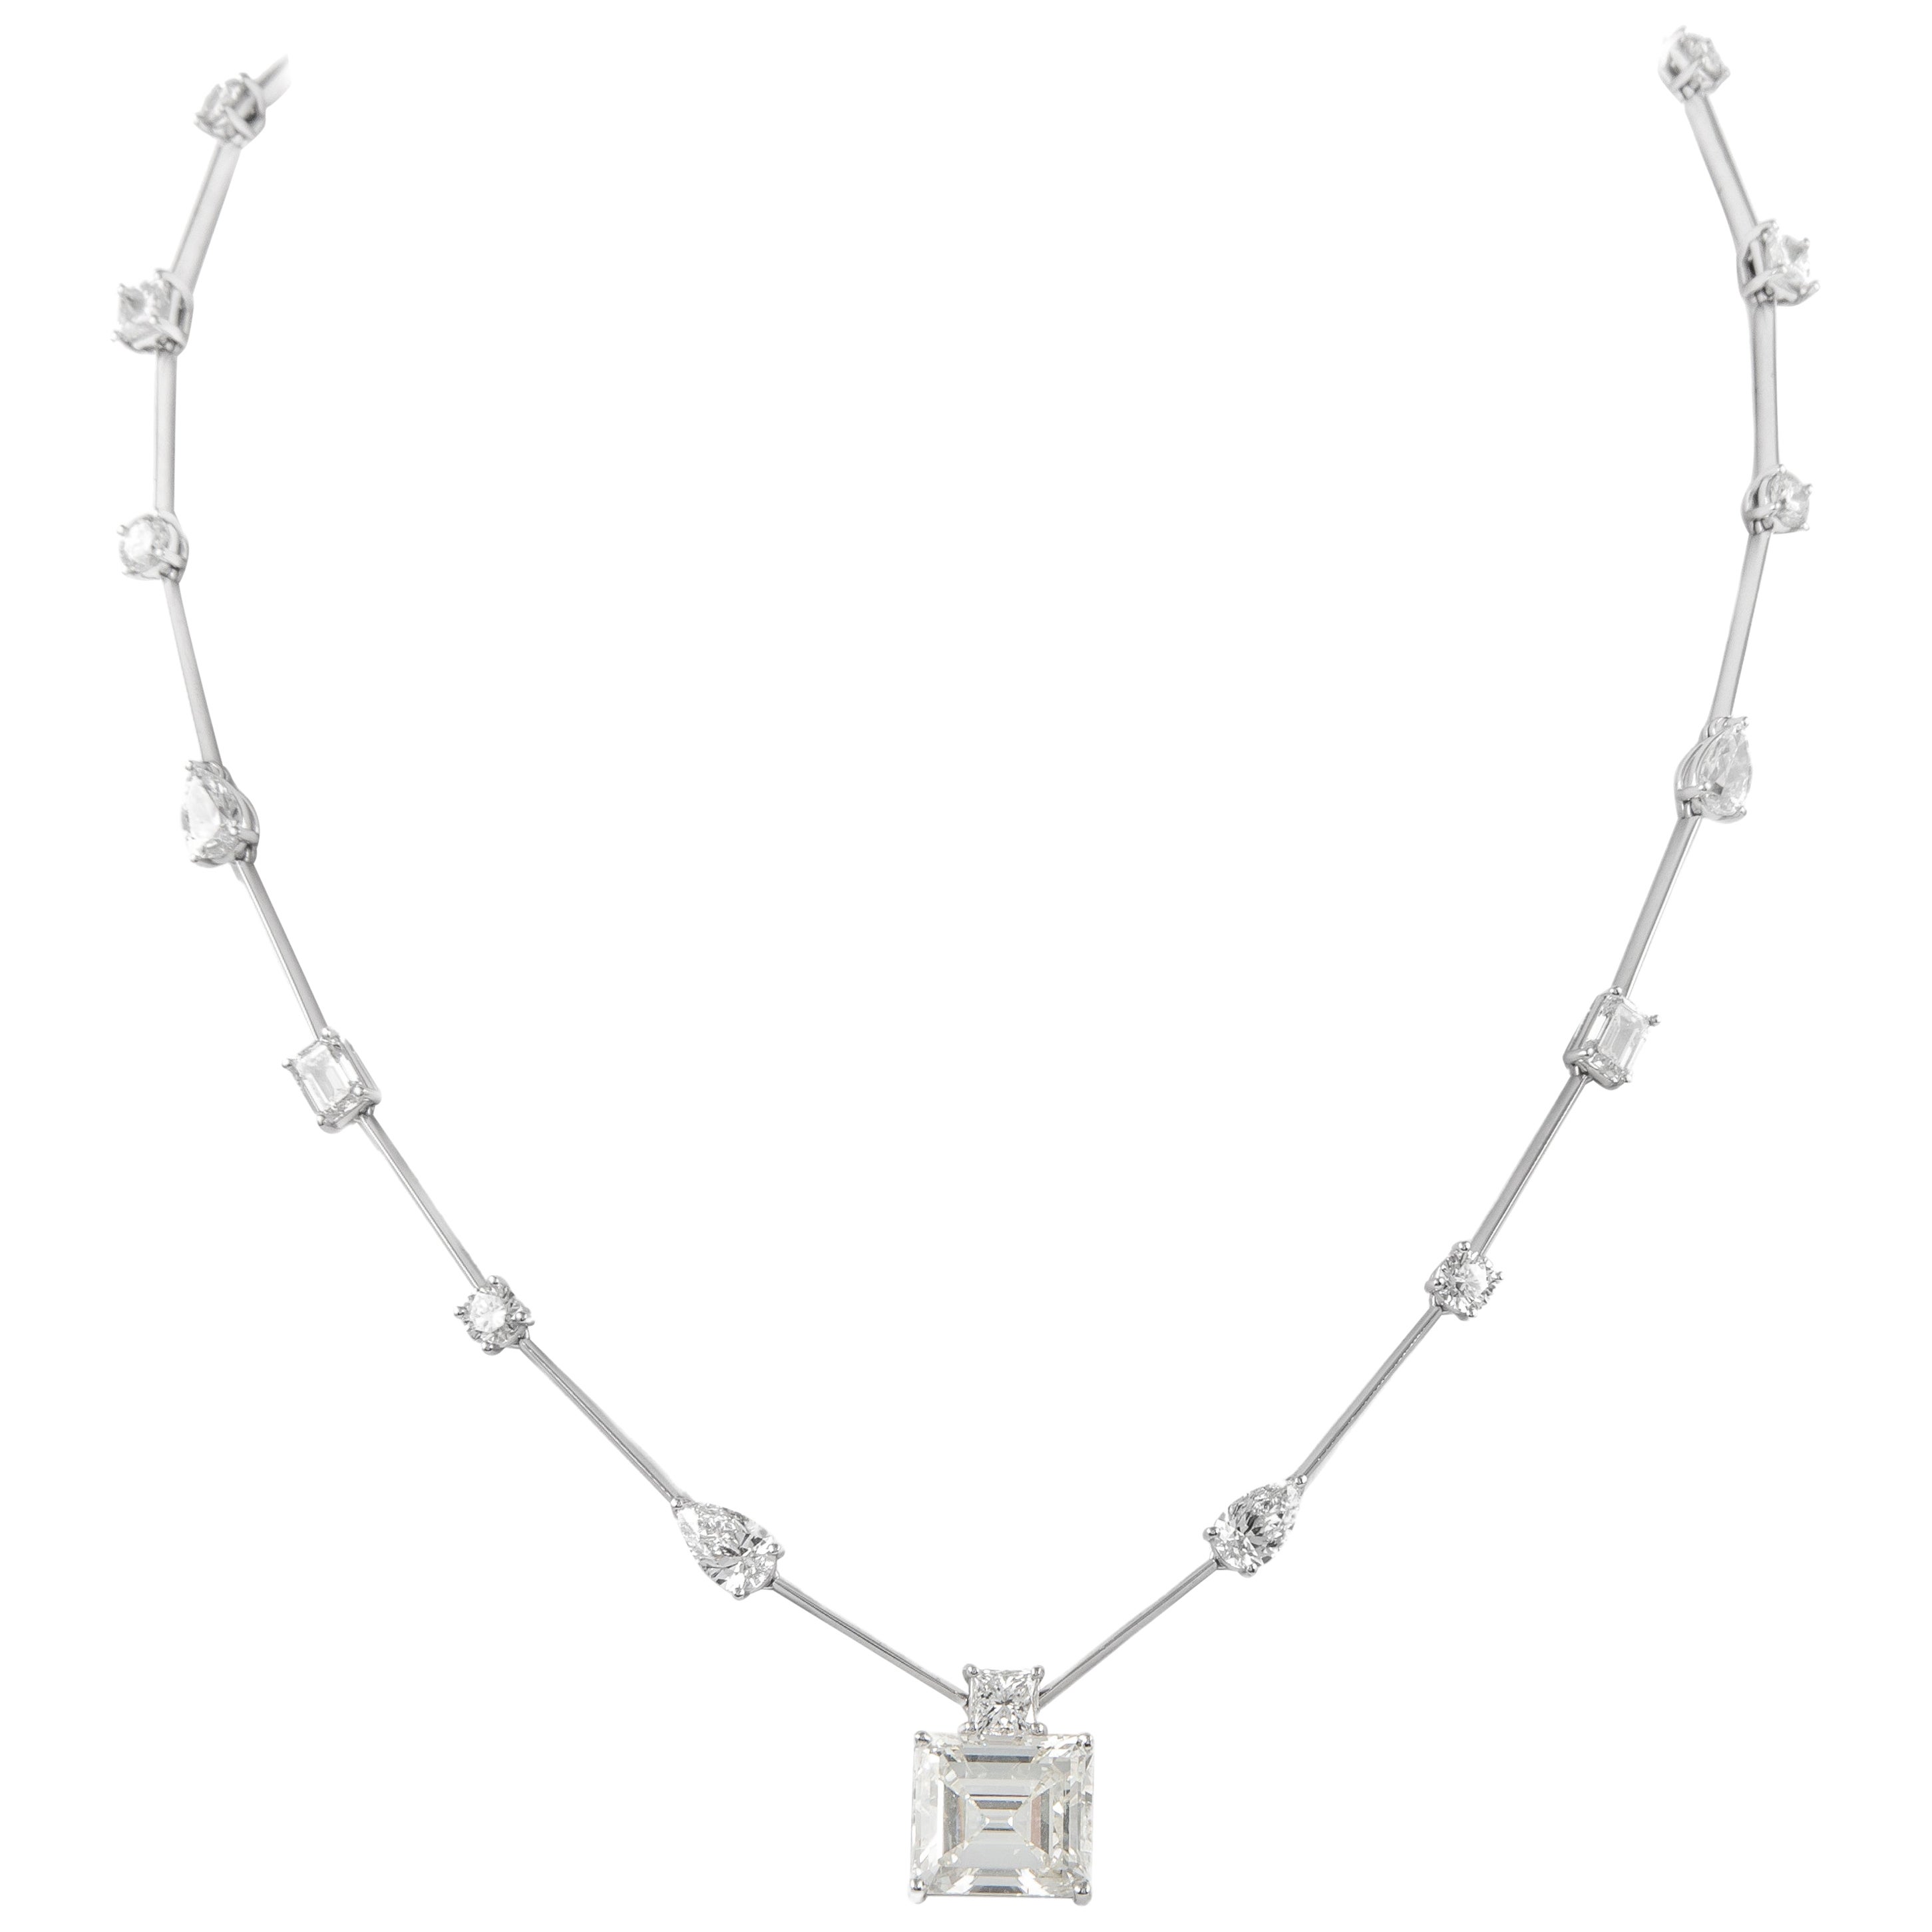 Alexander GIA 5.54ct Square Emerald Cut Diamond Necklace with Diamonds 18k Gold For Sale